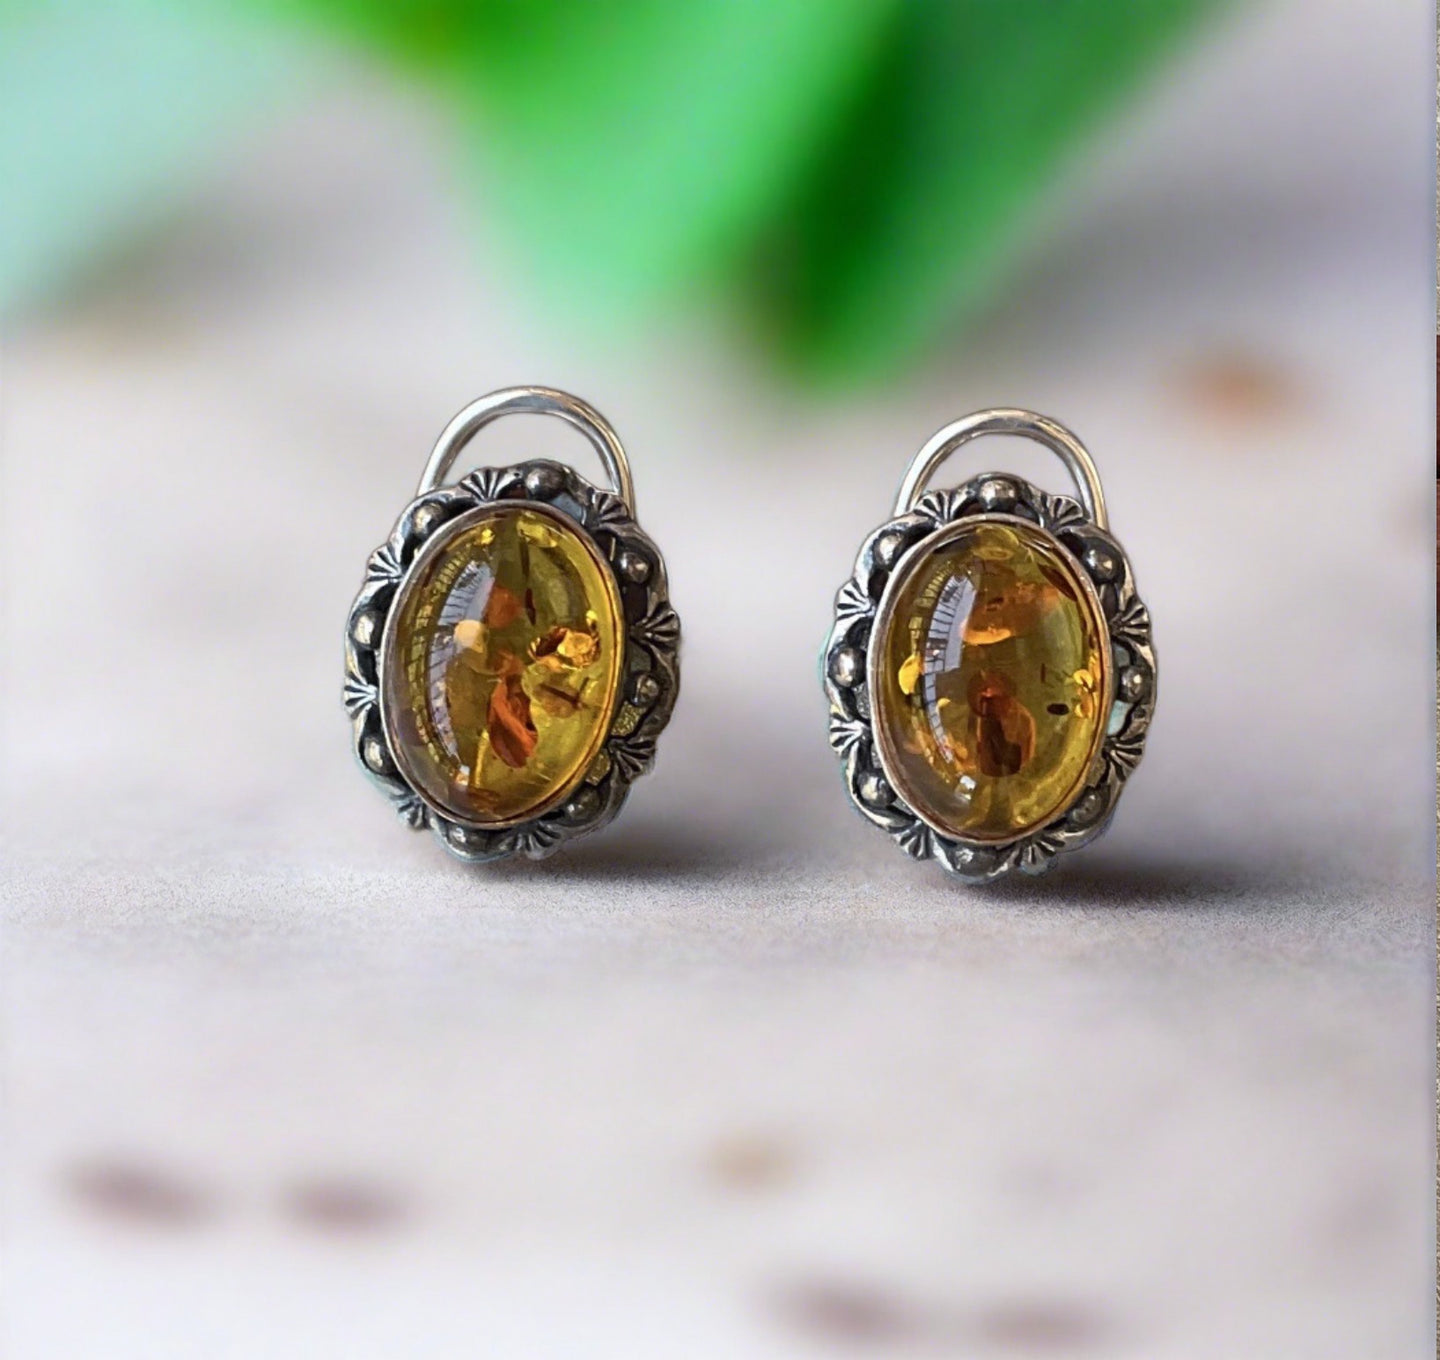 Hand Crafted Baltic Amber Clip On Earrings Set In Sterling Silver